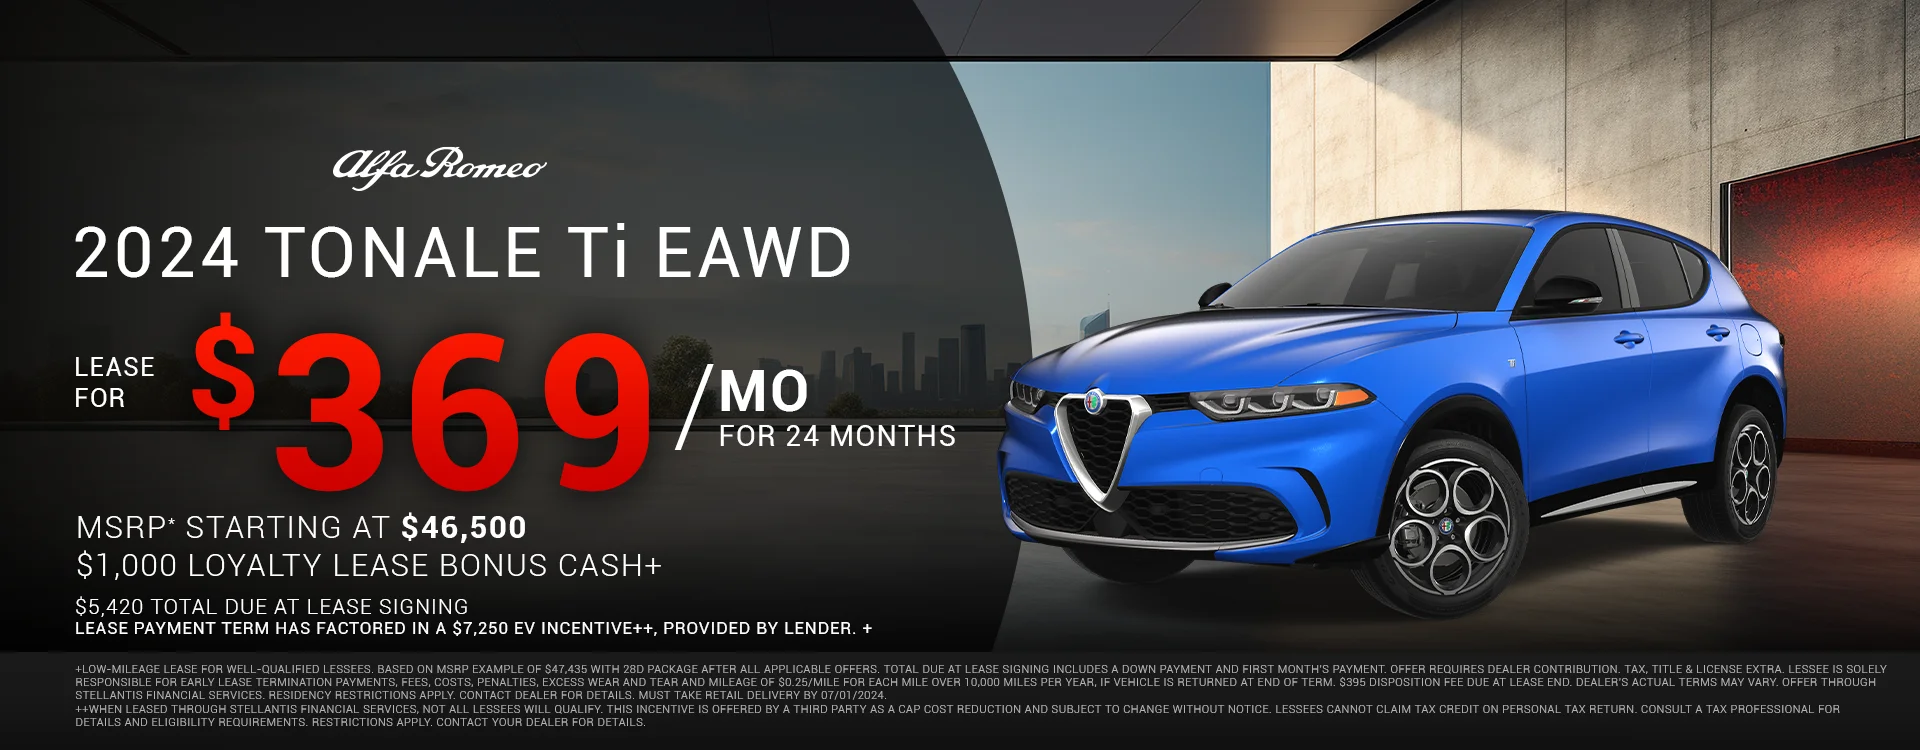 2024 Tonale Ti eAWD Lease for $409 per month for 36 months